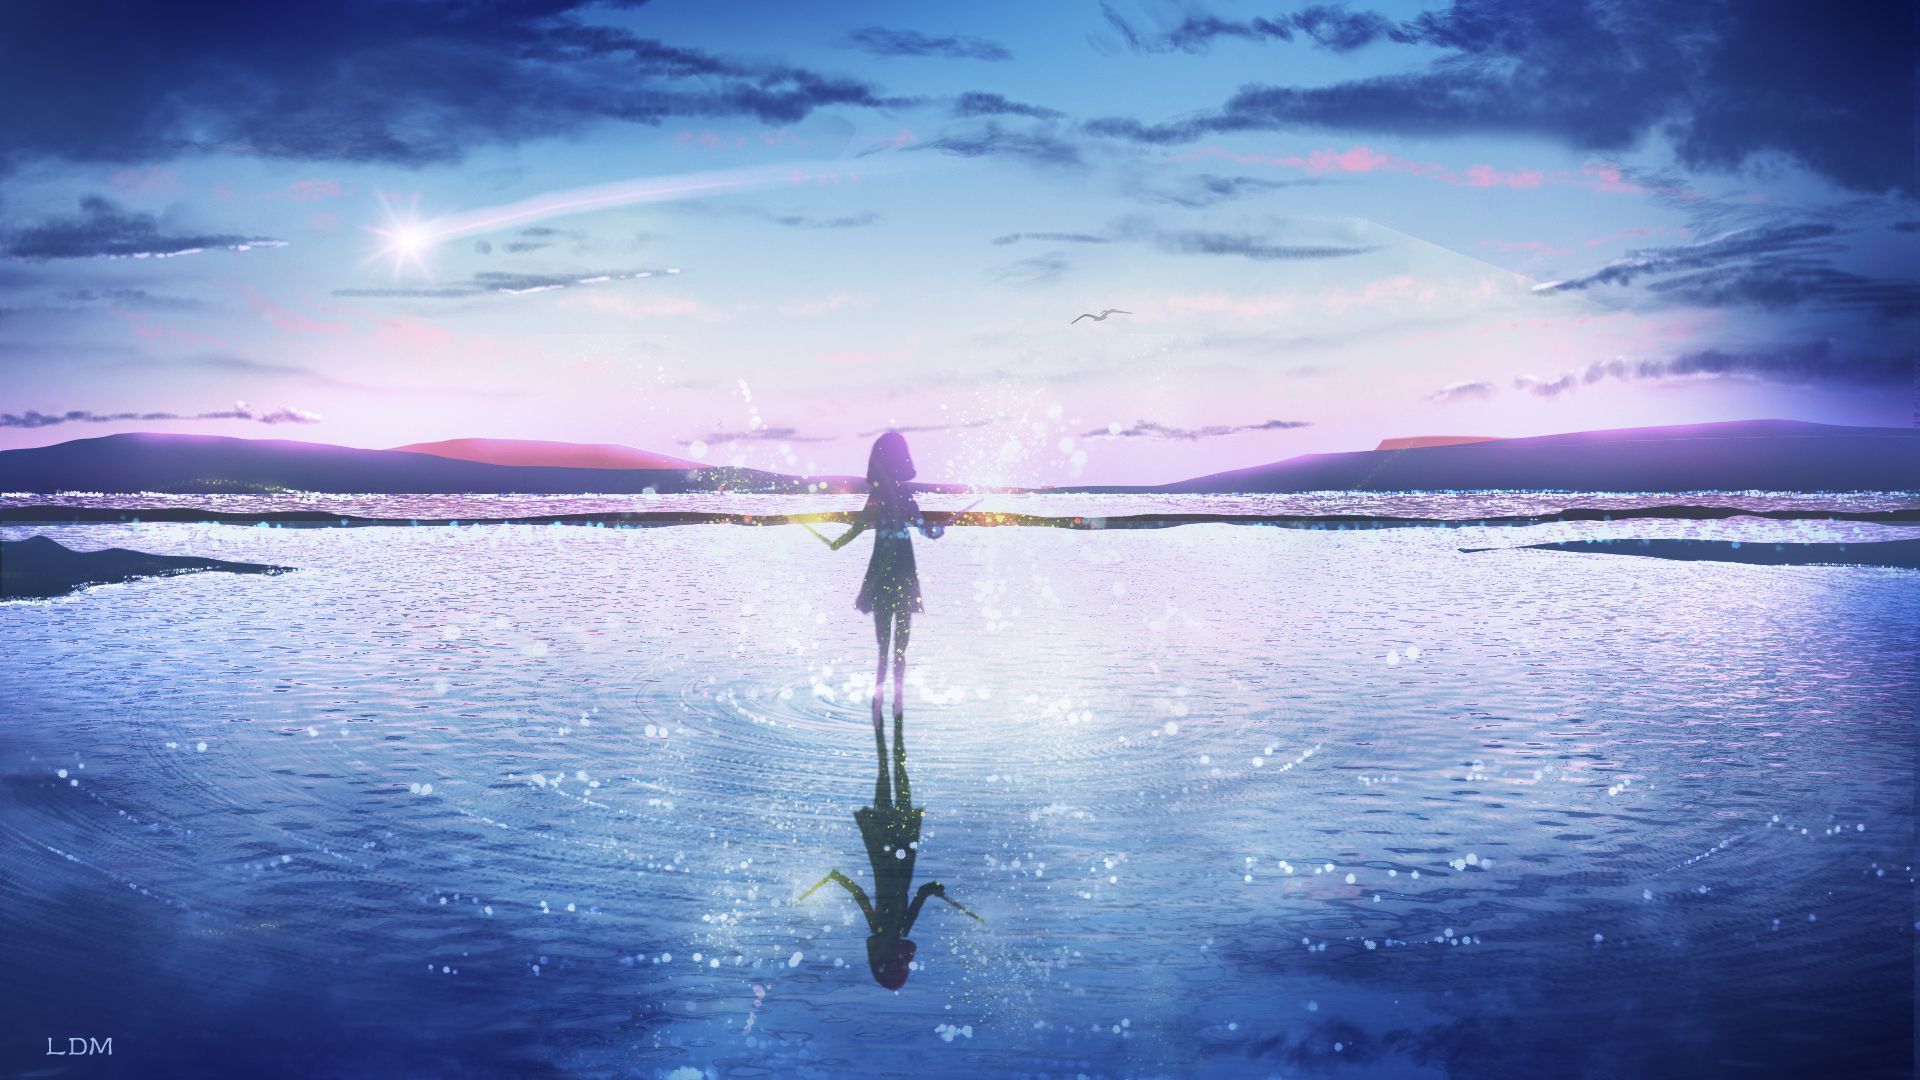 1920x1080 anime girl standing in the water wallpaper 1920x1080 - 1920x1080, anime